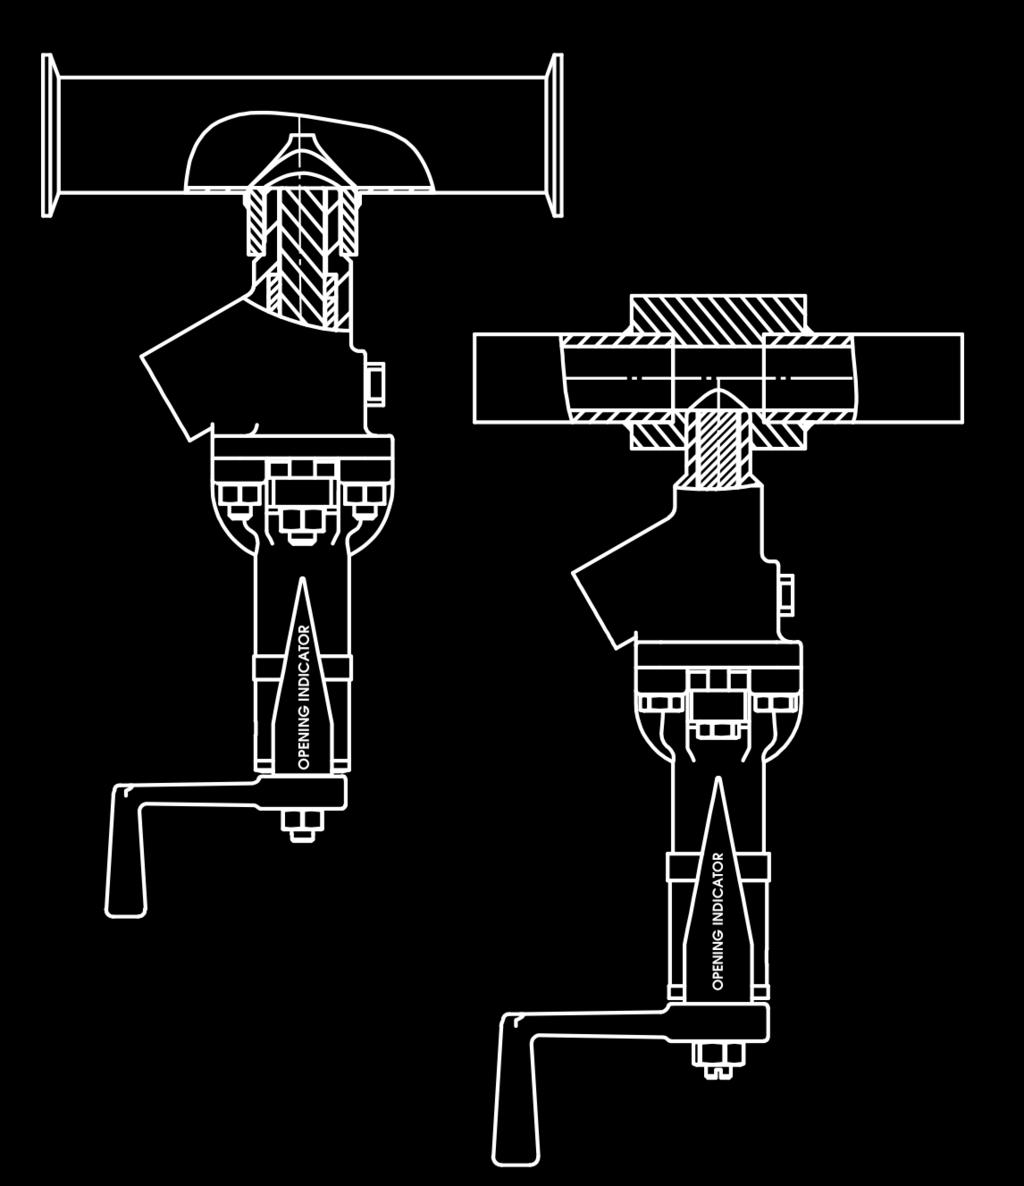 HALF COUPLING INSTALLATION INSTRUCTIONS The Sampling Valve inlet connection should be flush with the contour of the half coupling, AFTER WELDING INTO PIPE OR VESSEL, to assure proper satisfactory